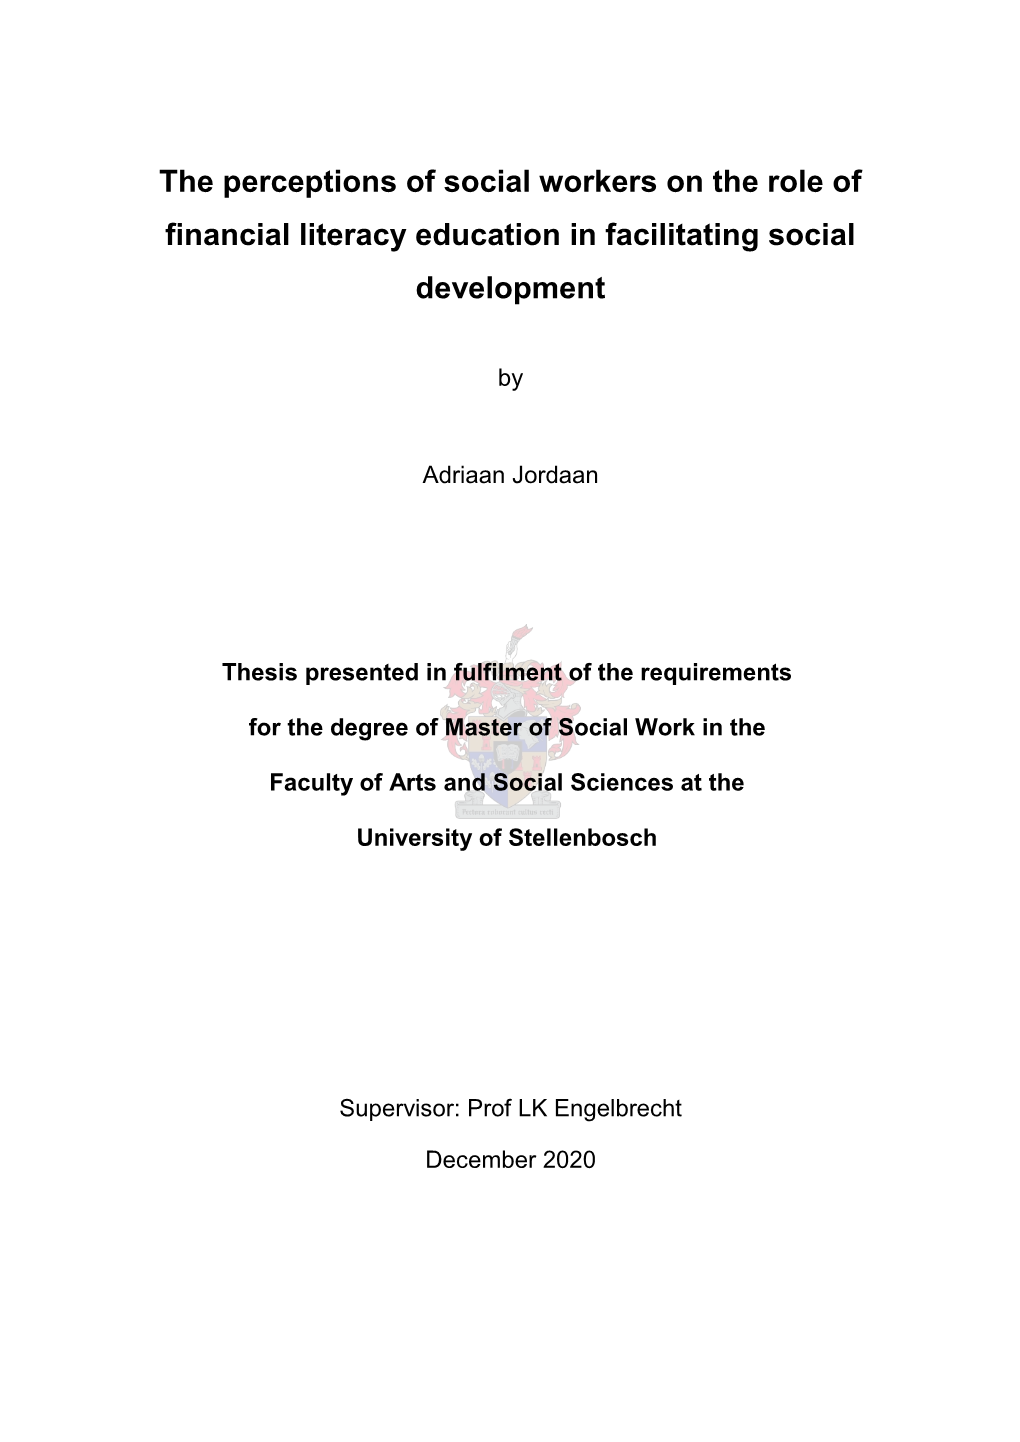 The Perceptions of Social Workers on the Role of Financial Literacy Education in Facilitating Social Development